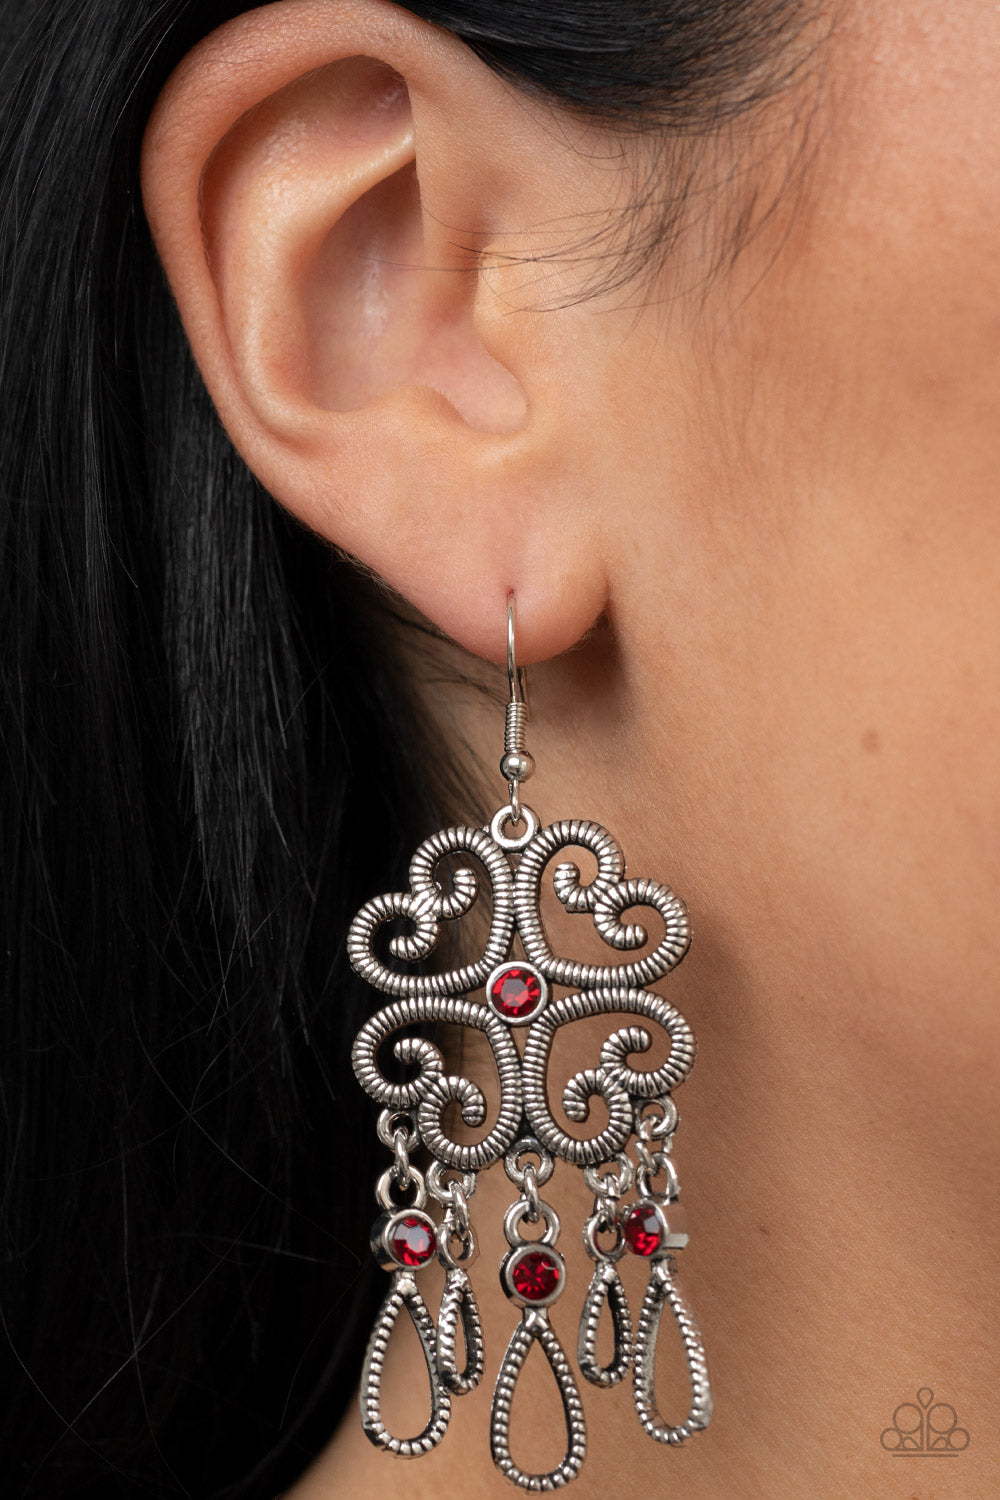 Majestic Makeover - Red and Silver Earrings - Paparazzi Jewelry - Bejeweled Accessories By Kristie - Etched in linear texture, four whimsical hearts coalesce into an airy frame. A dainty red rhinestone dots the center while a flirty fringe of teardrop frames adorned with fiery red rhinestones sways below for an eye-catching finish. Earring attaches to a standard fishhook fitting.